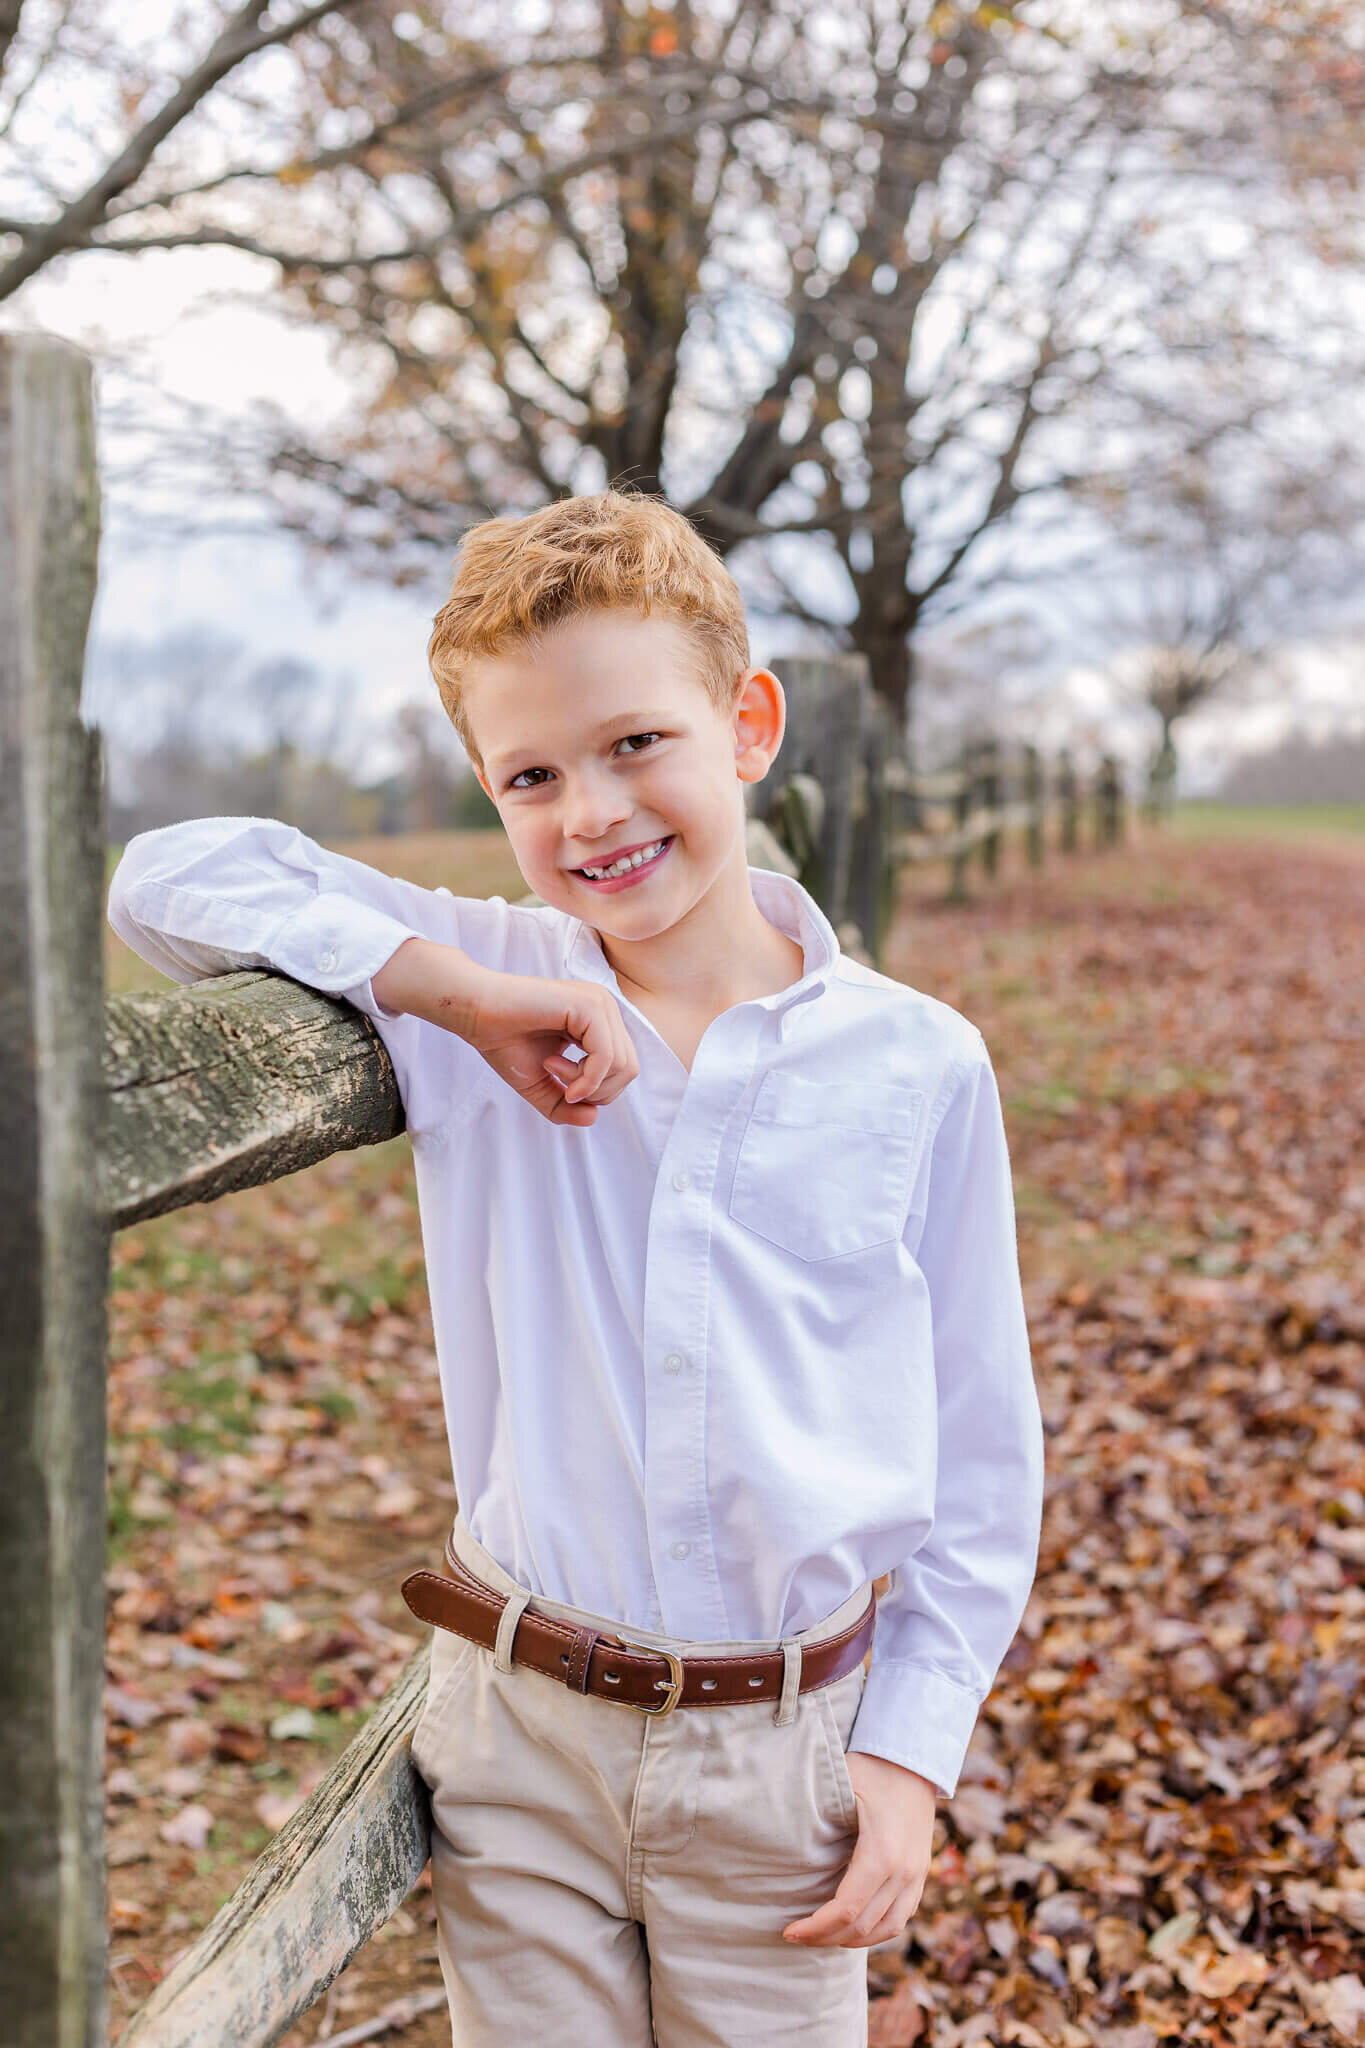 A young boy posing against a fence at a park in Burke, Virginia.